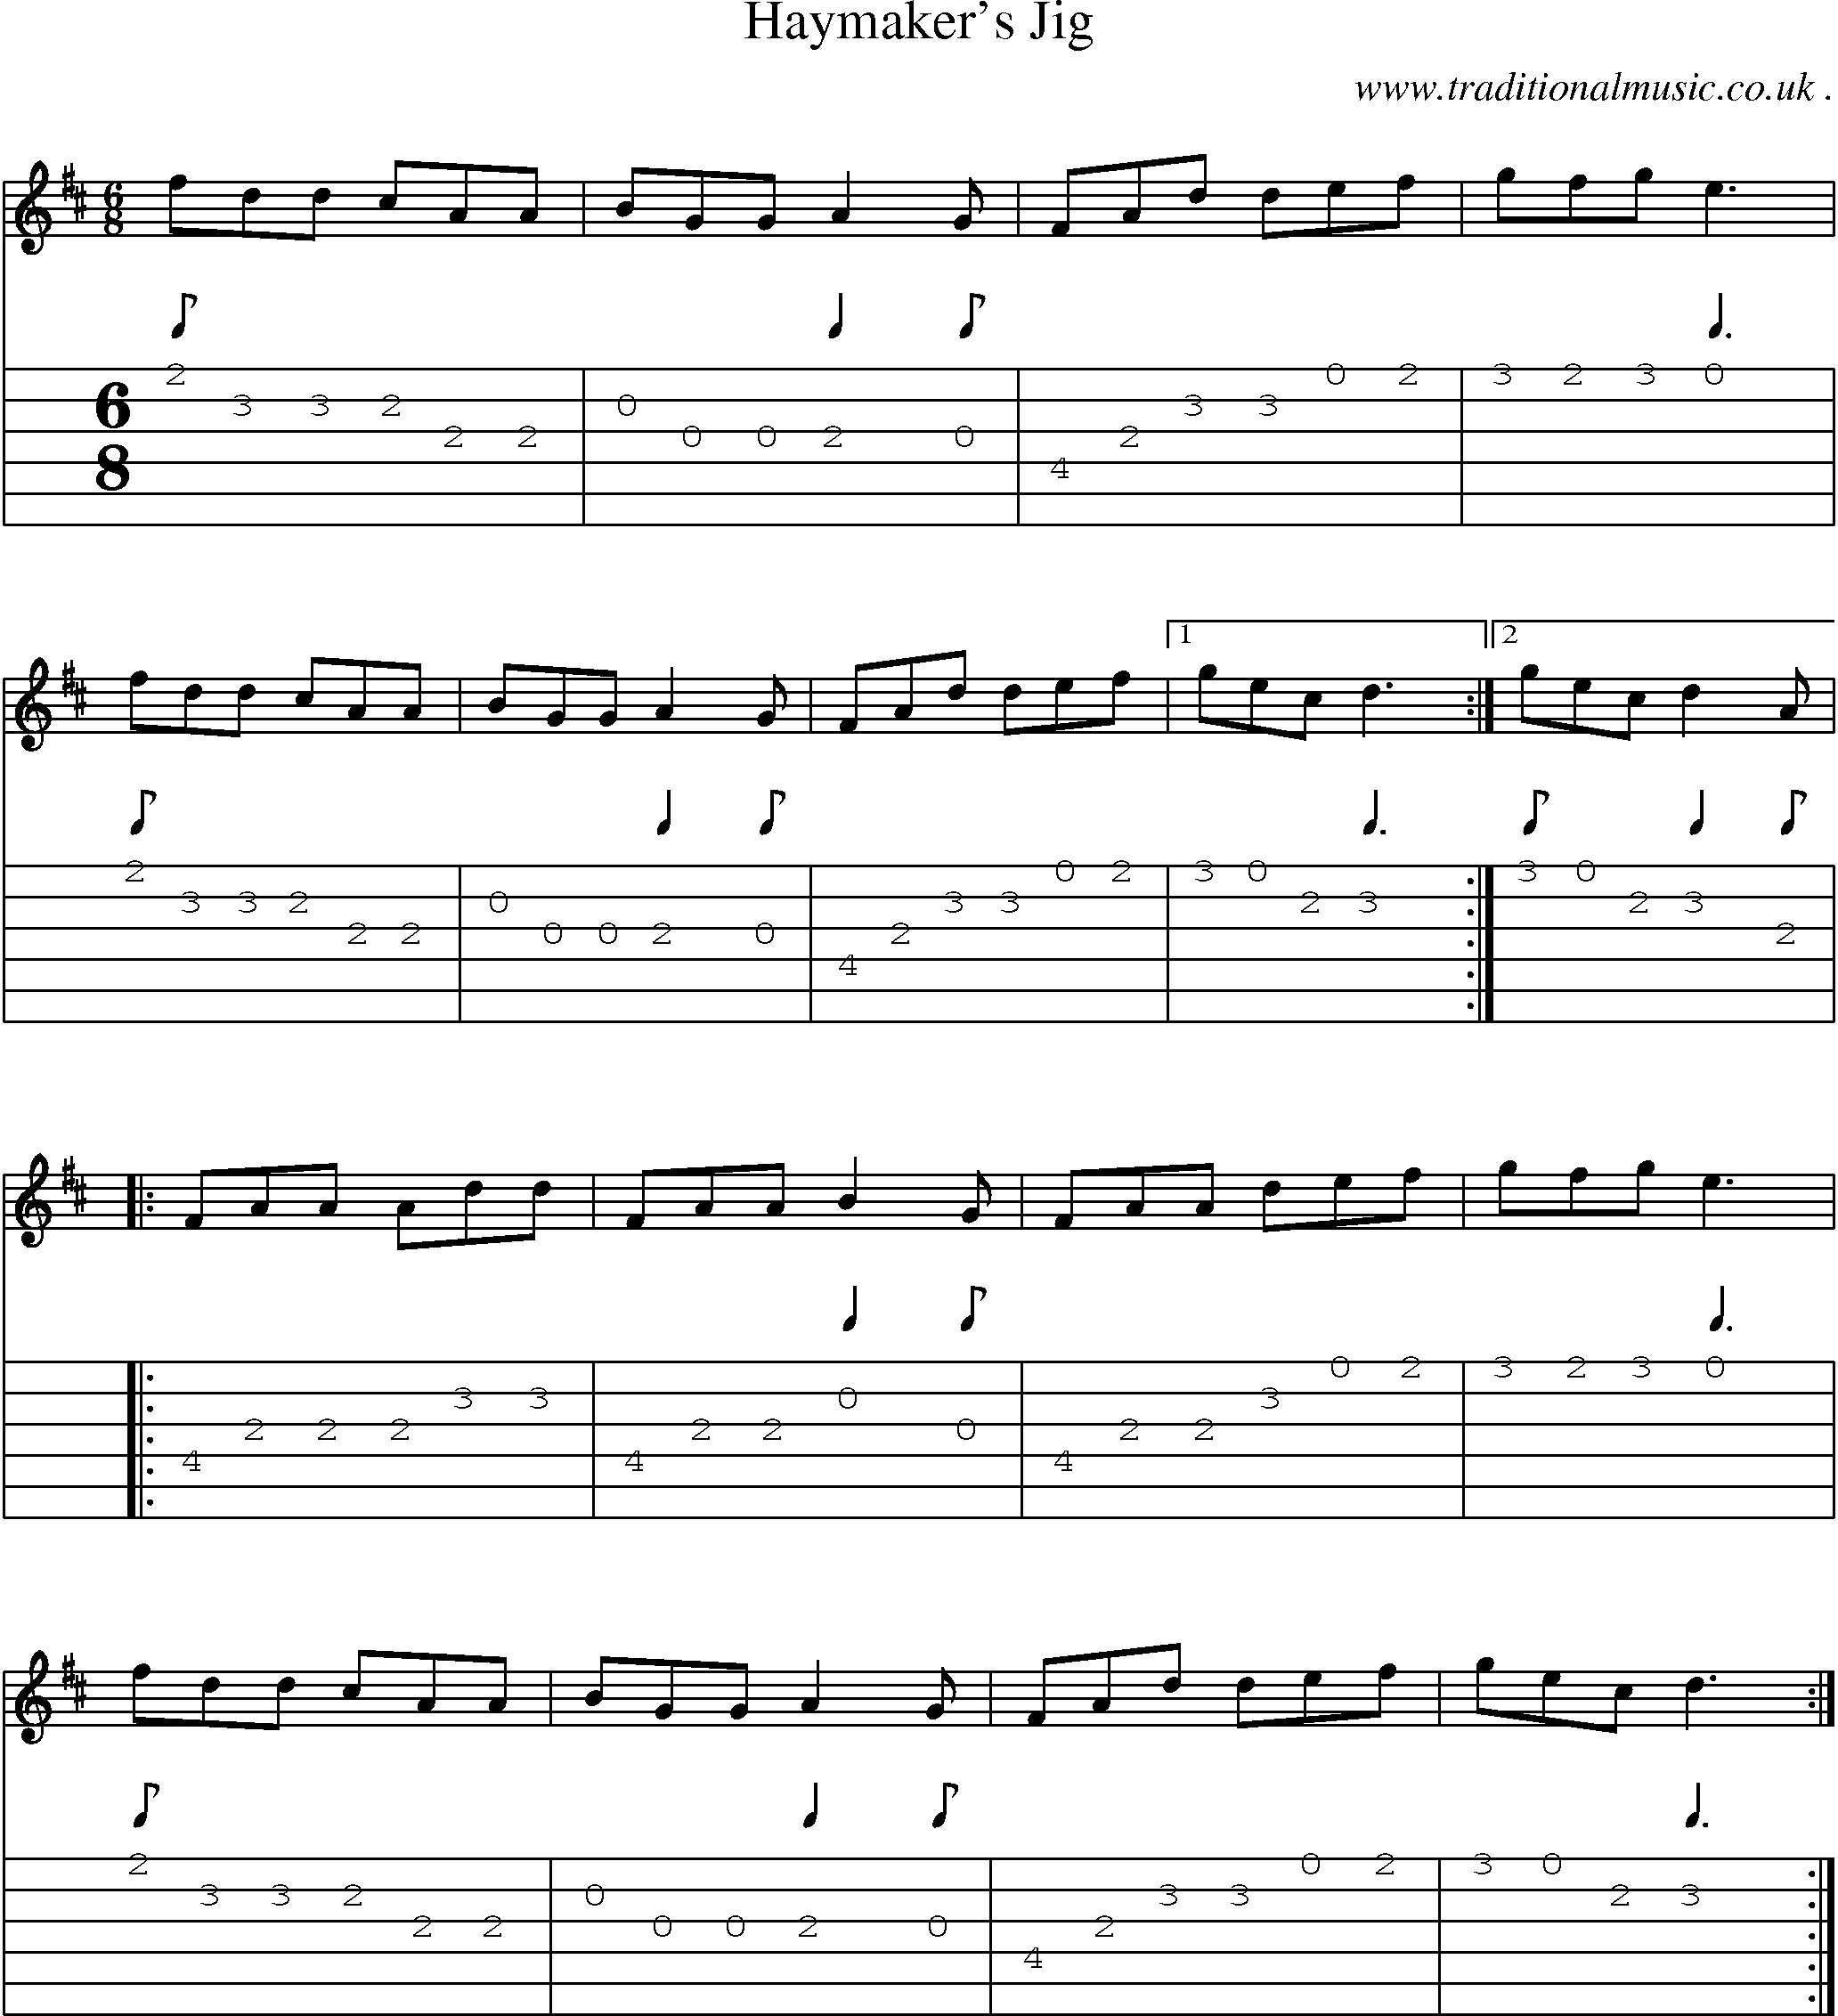 Sheet-Music and Guitar Tabs for Haymakers Jig